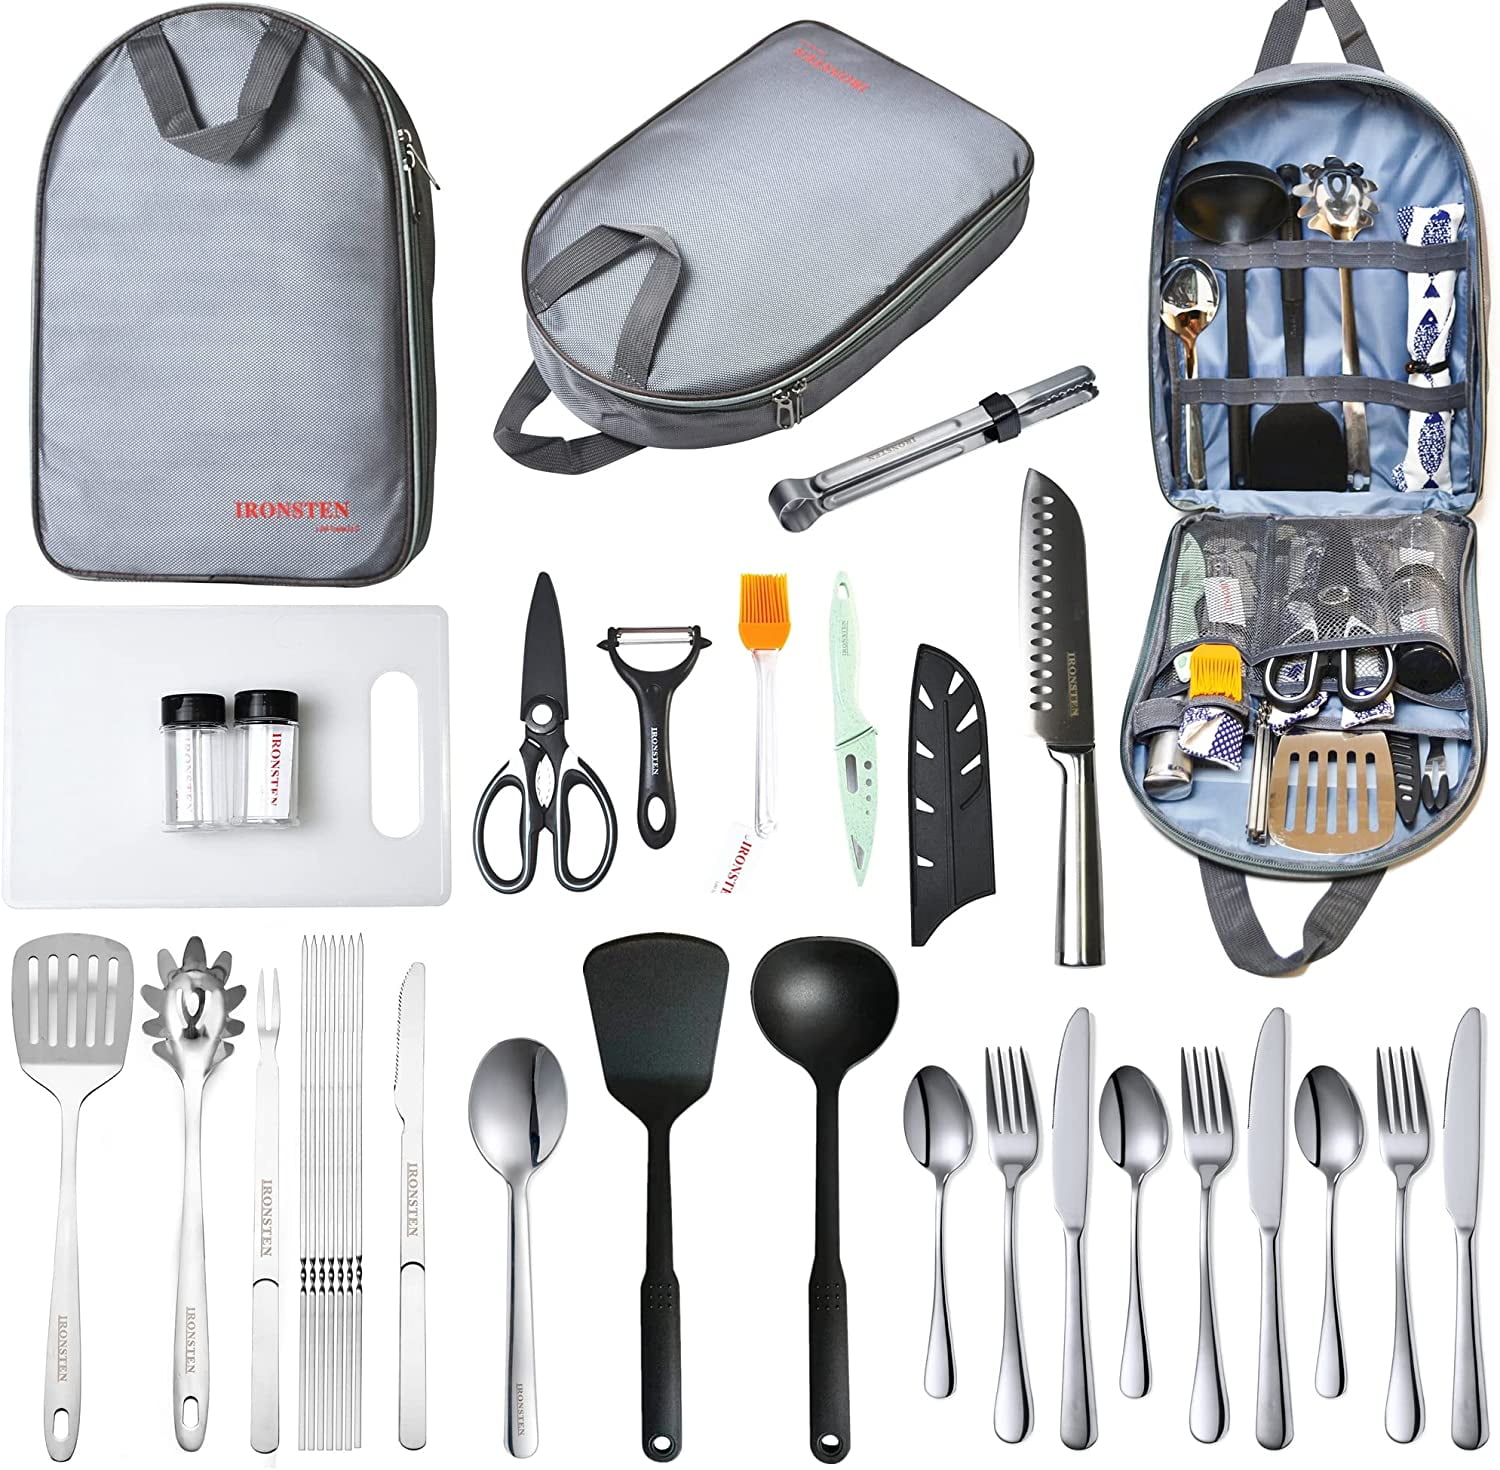 Extremus 13 Pcs Camp Kitchen Cooking Utensil Set Cookware Kit - Travel  Organizer Grill Accessories Portable Compact Gear for Backpacking BBQ  Camping